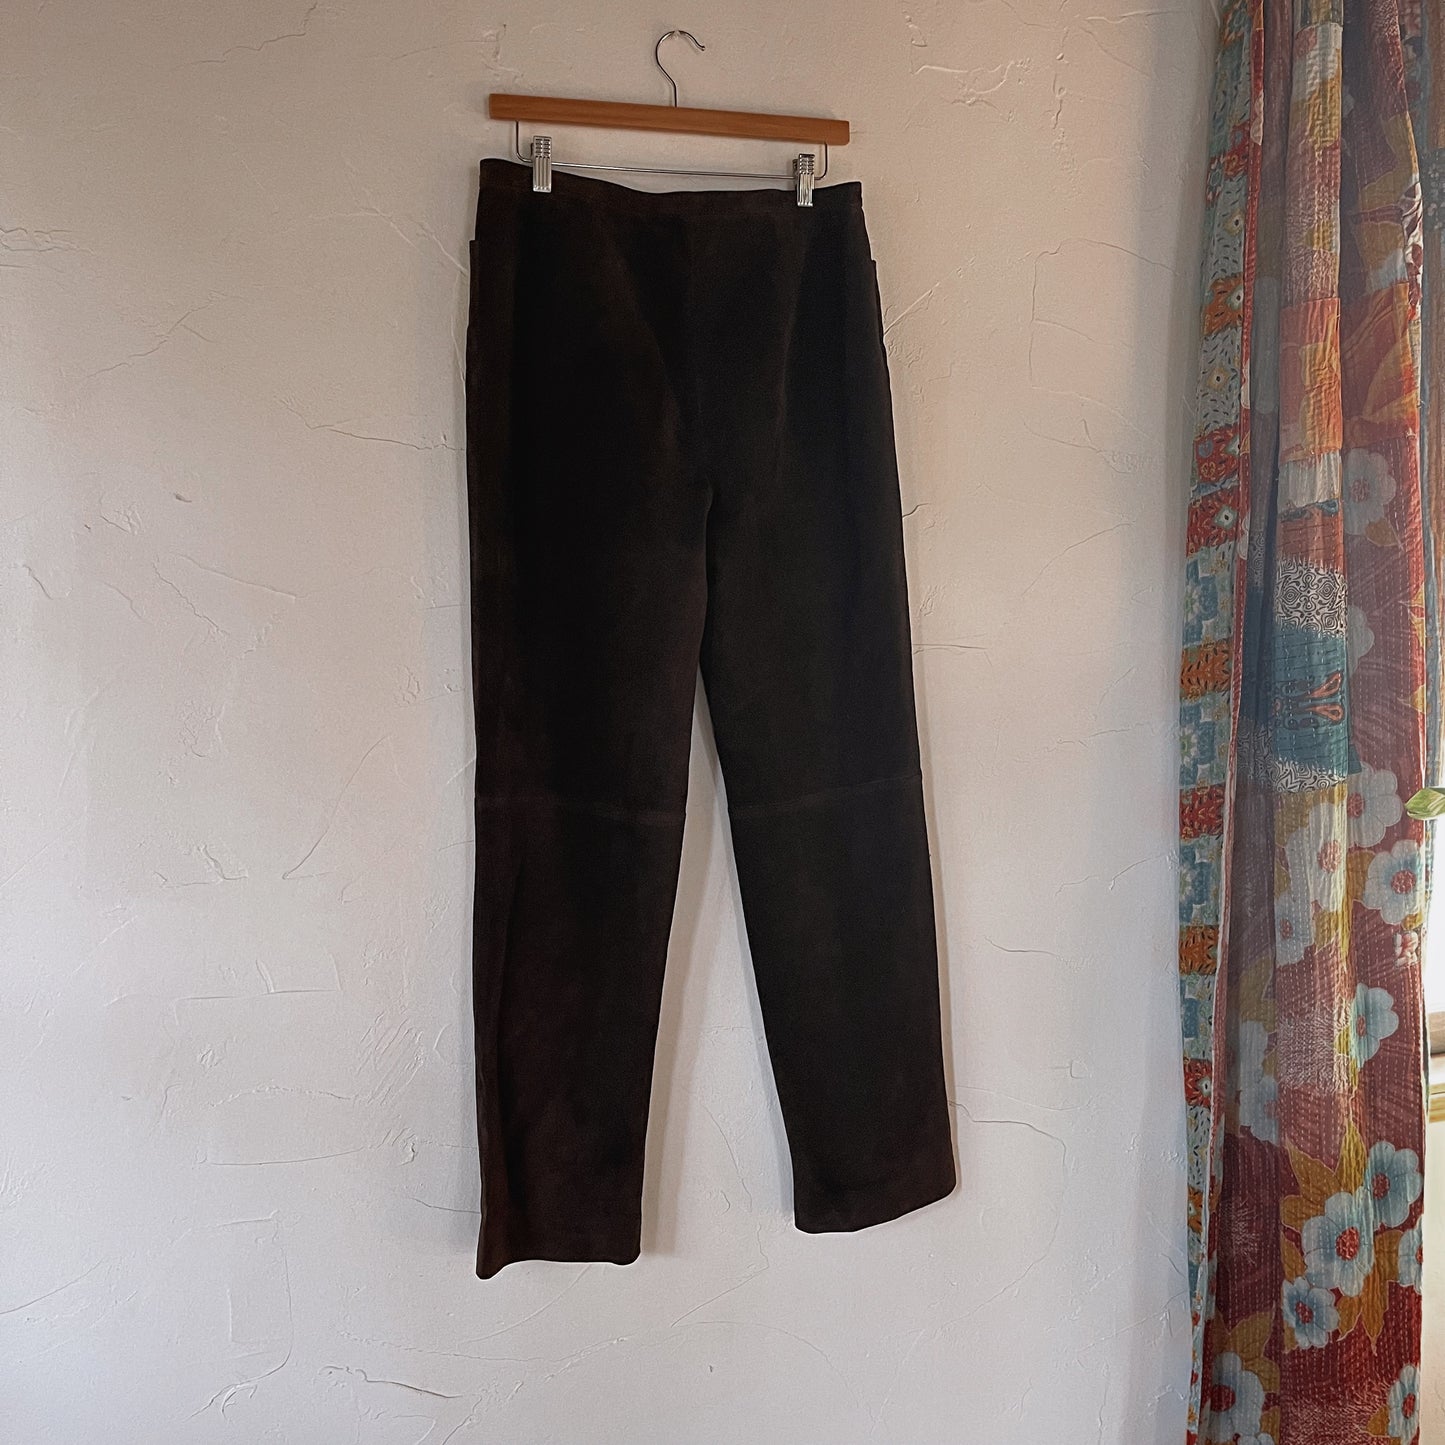 Vintage Michael Kors Suede Leather High Waisted Trouser 90’s Italian